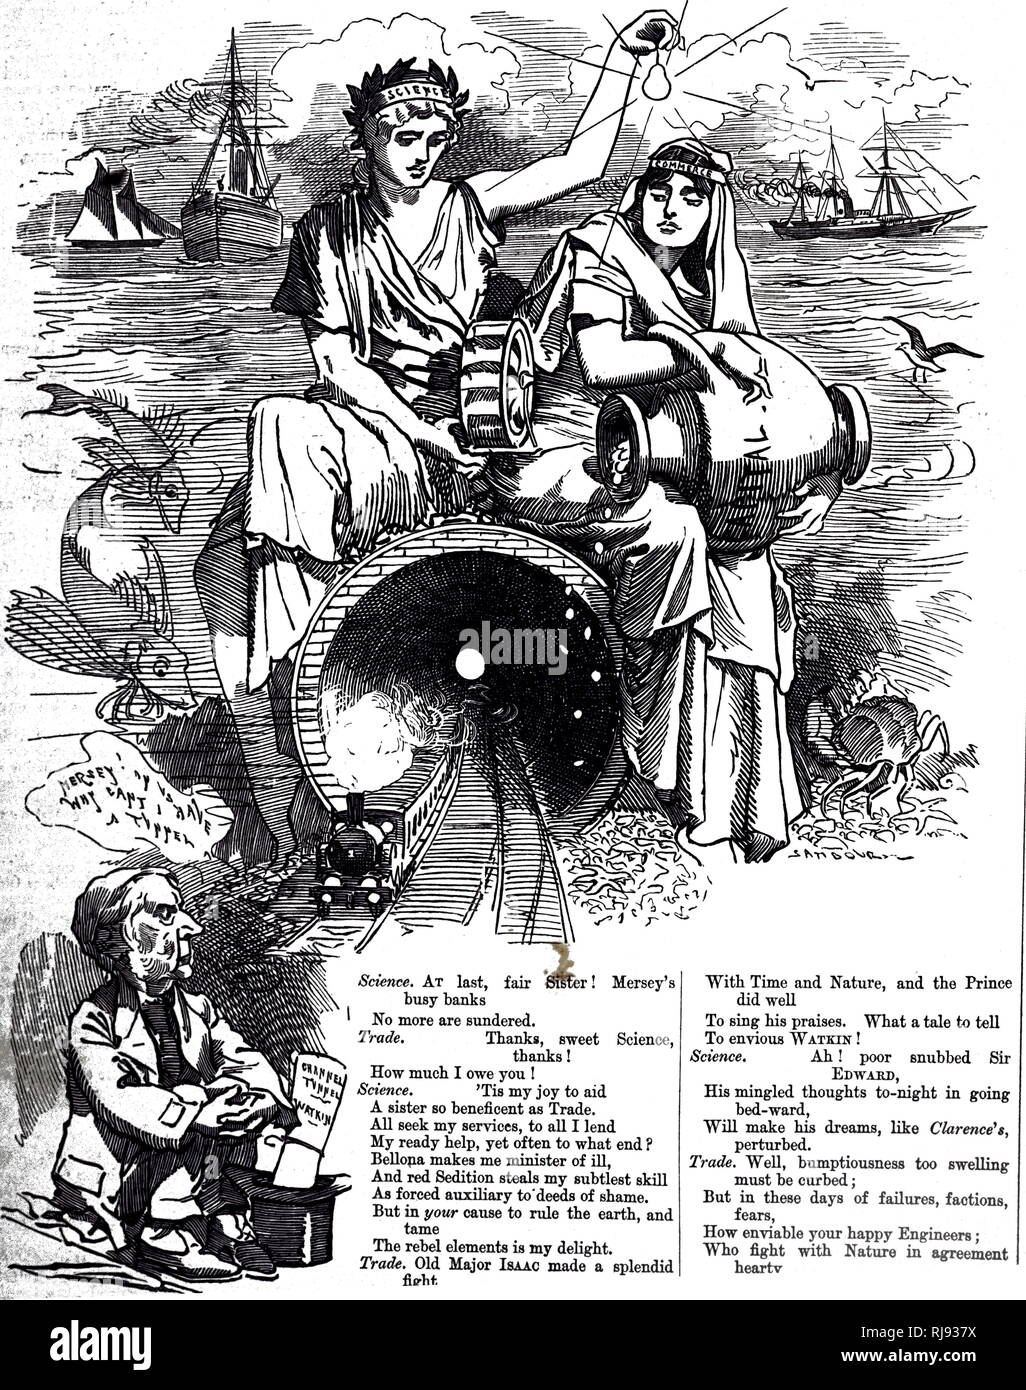 A cartoon commenting on the opening of the Mersey tunnels linking Liverpool and Wirral Peninsula. Illustrated by Edward Linley Sambourne (1844-1910) an English cartoonist and illustrator. Dated 19th century Stock Photo